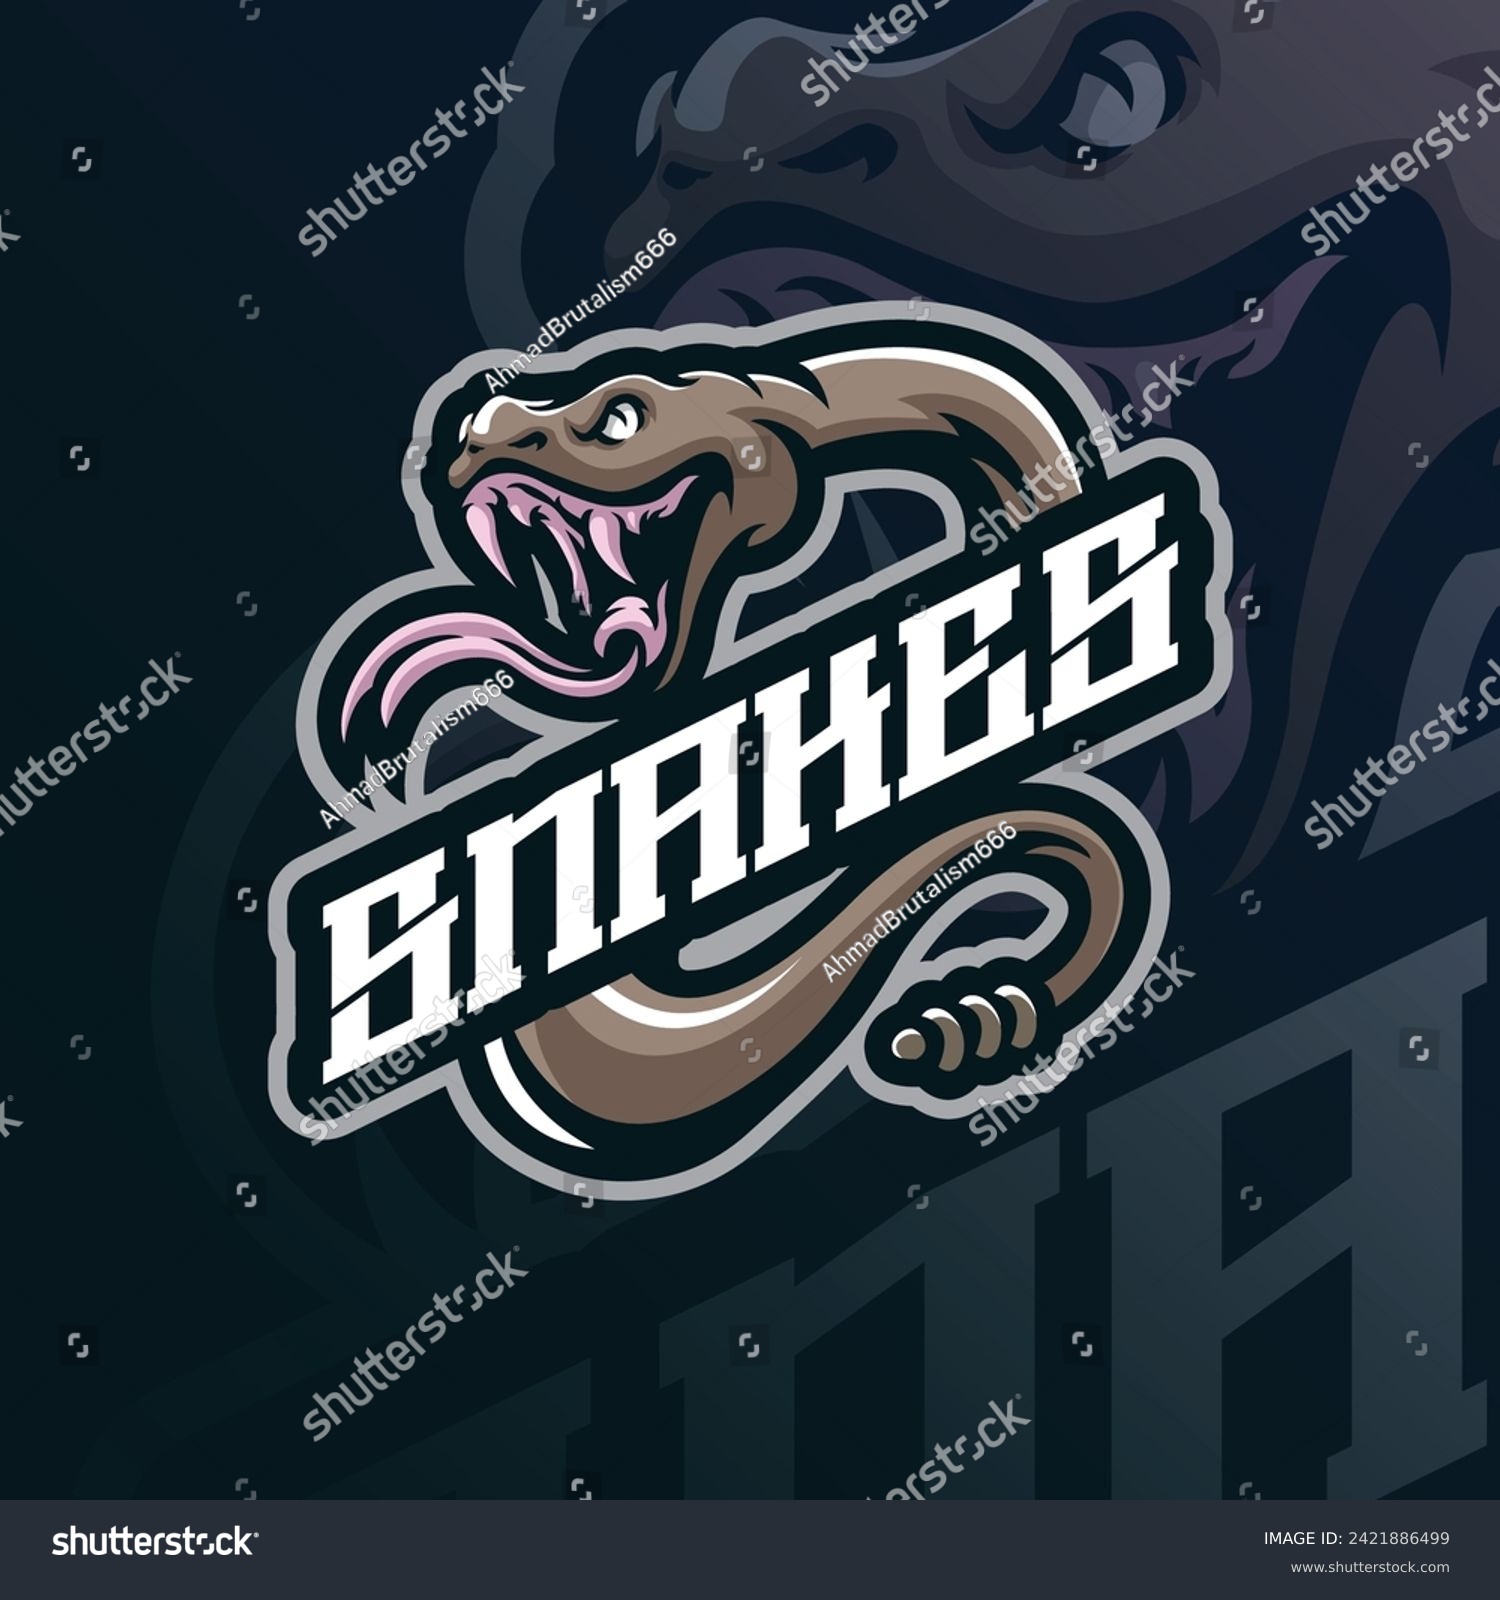 SVG of Snake mascot logo design vector with modern illustration concept style for badge, emblem and t shirt printing. Angry snake illustration for sport and esport team. svg